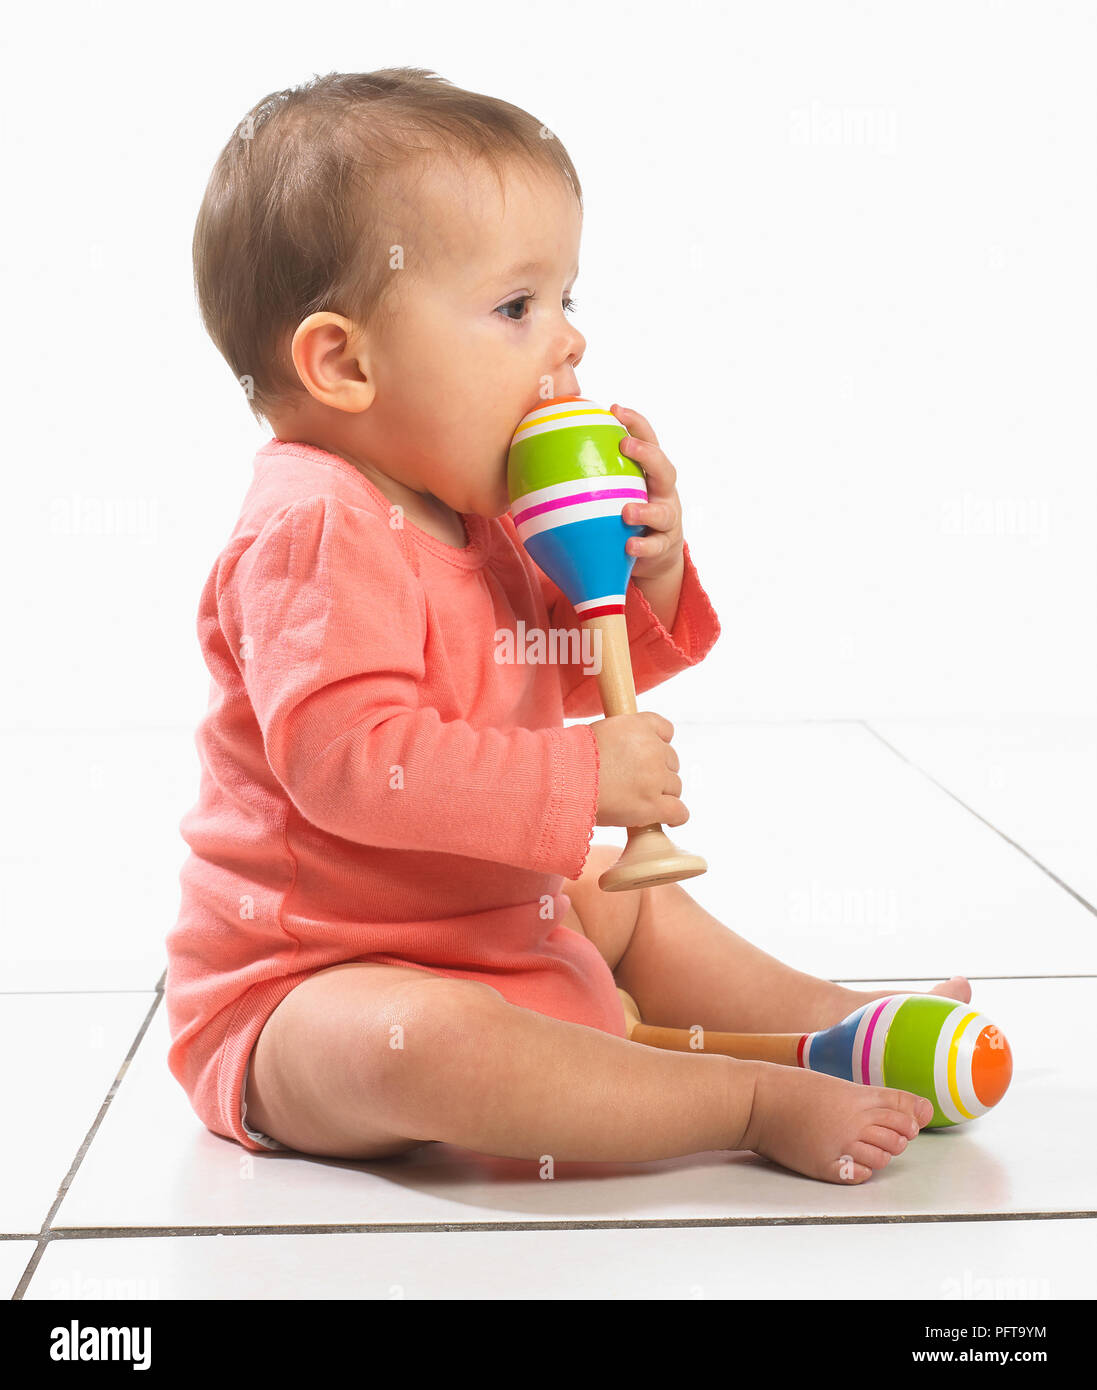 Baby girl (8 months) playing with maracas Stock Photo - Alamy